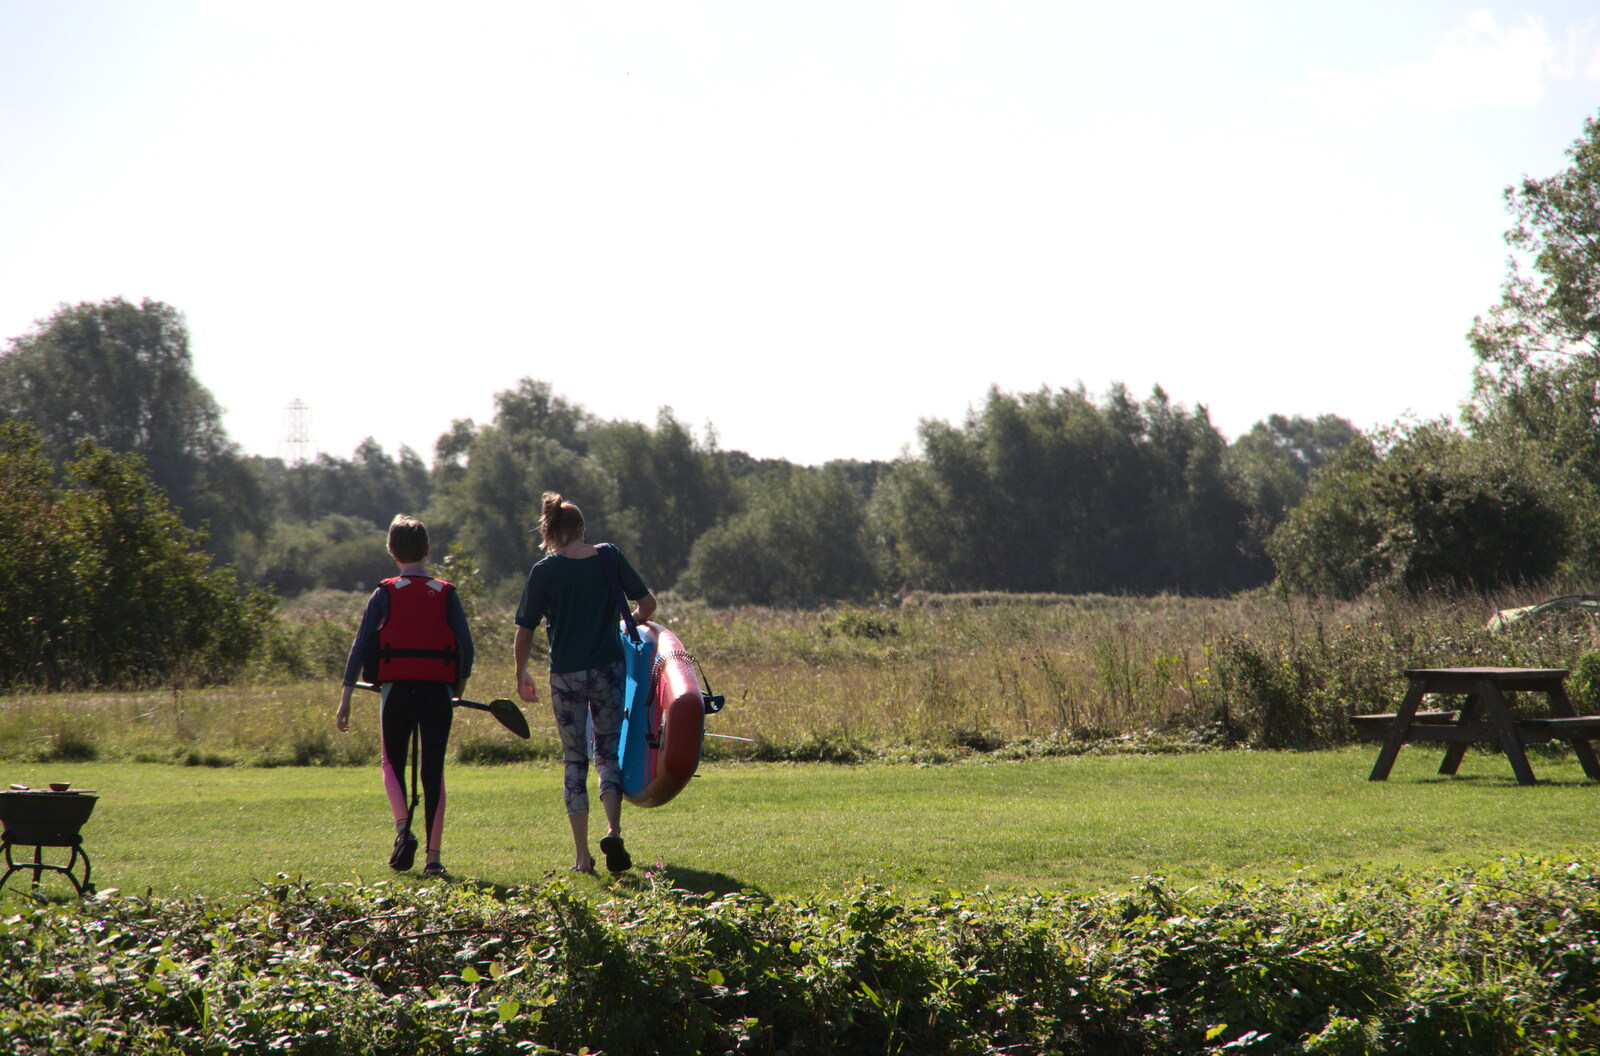 Camping at Three Rivers, Geldeston, Norfolk - 5th September 2020: Lydia and Allyson head off